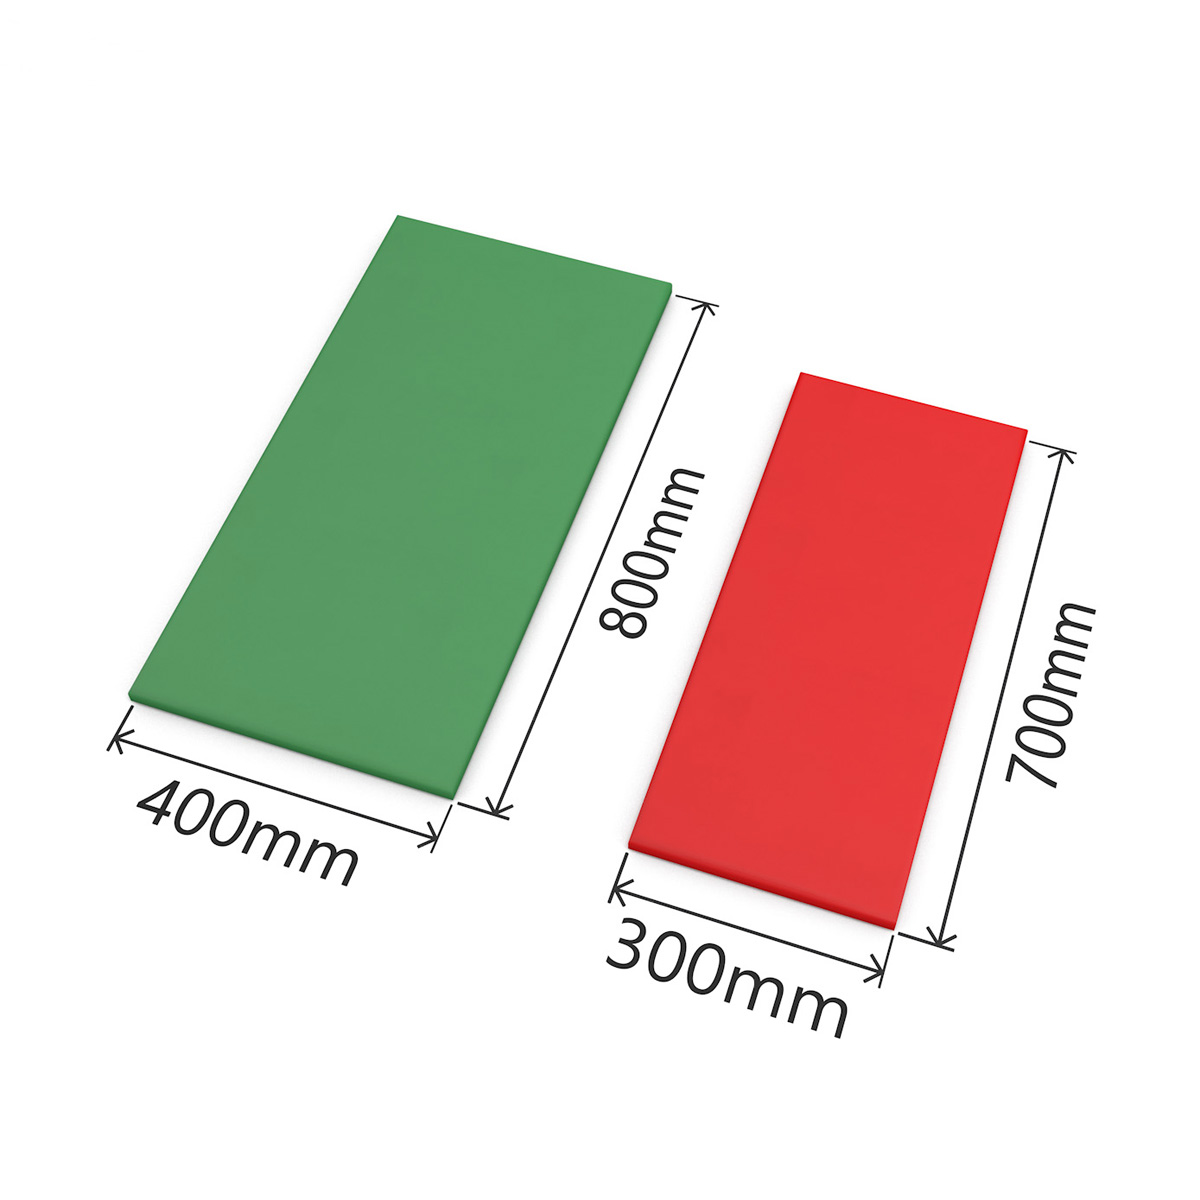 Dimensions of STRATOS™ Rectangle Acoustic Panelling